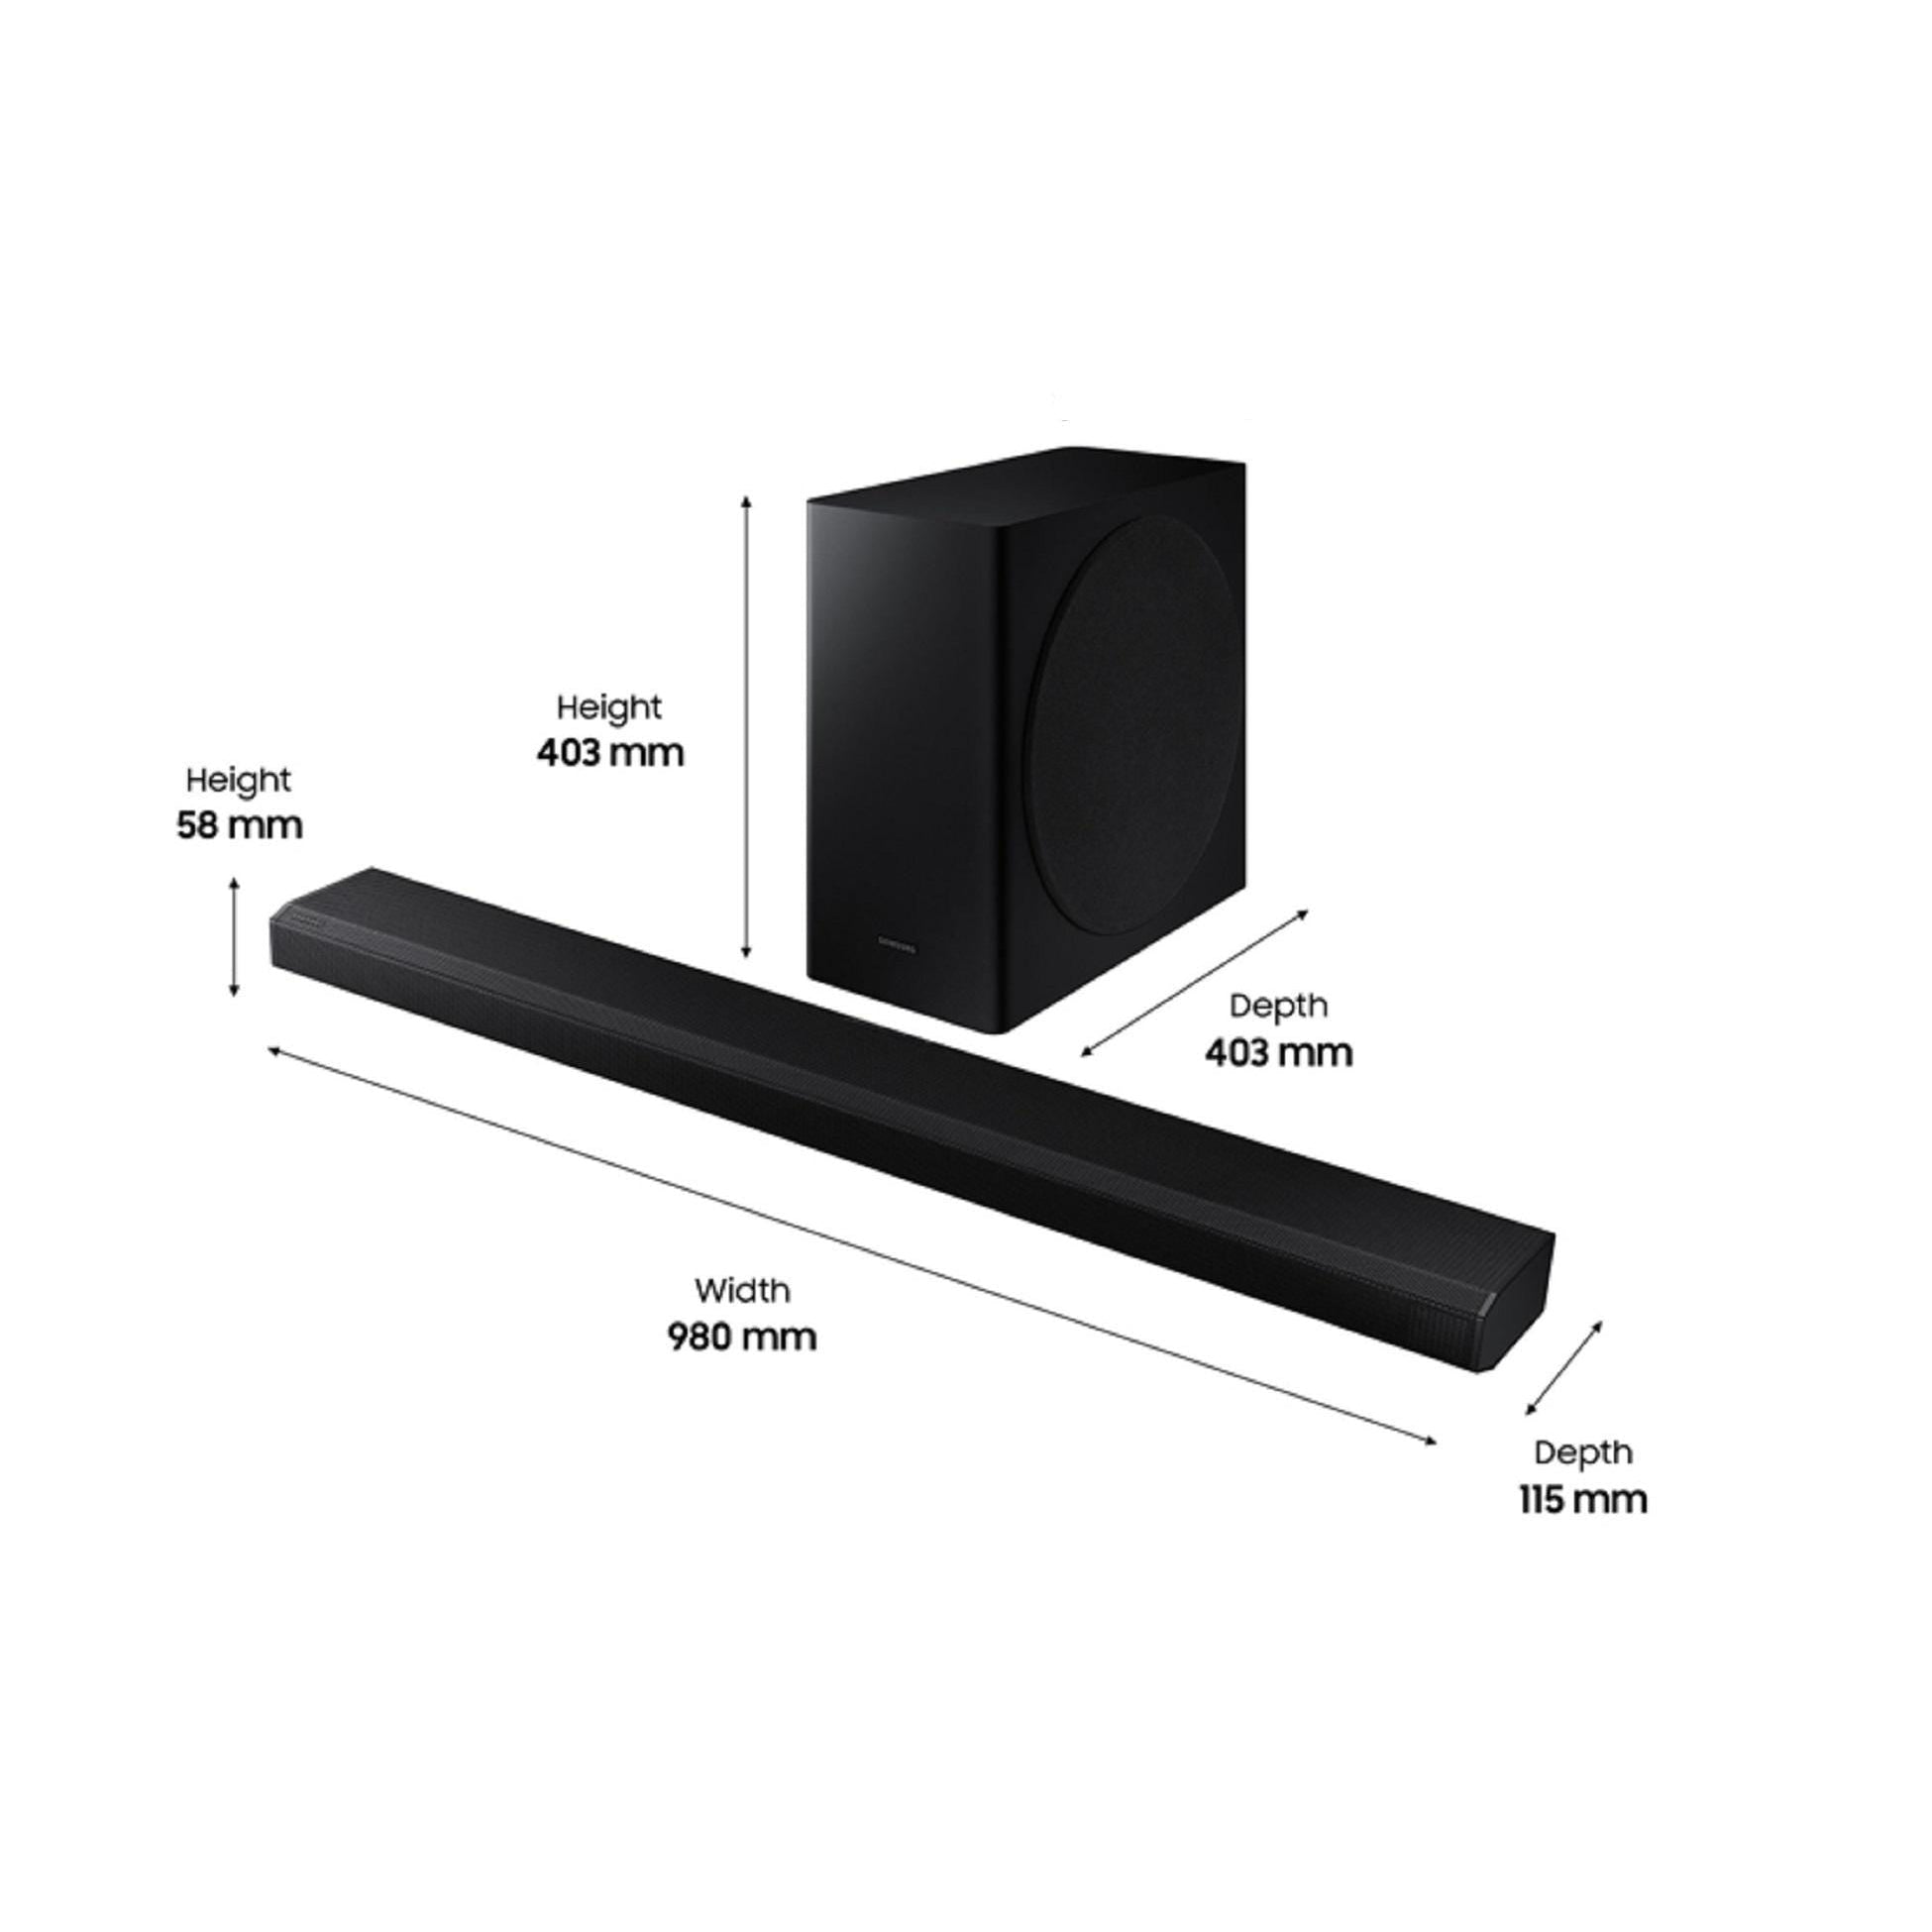 Samsung HW-Q800T 3.1.2ch Cinematic Soundbar with Dolby Atmos and DTS:X